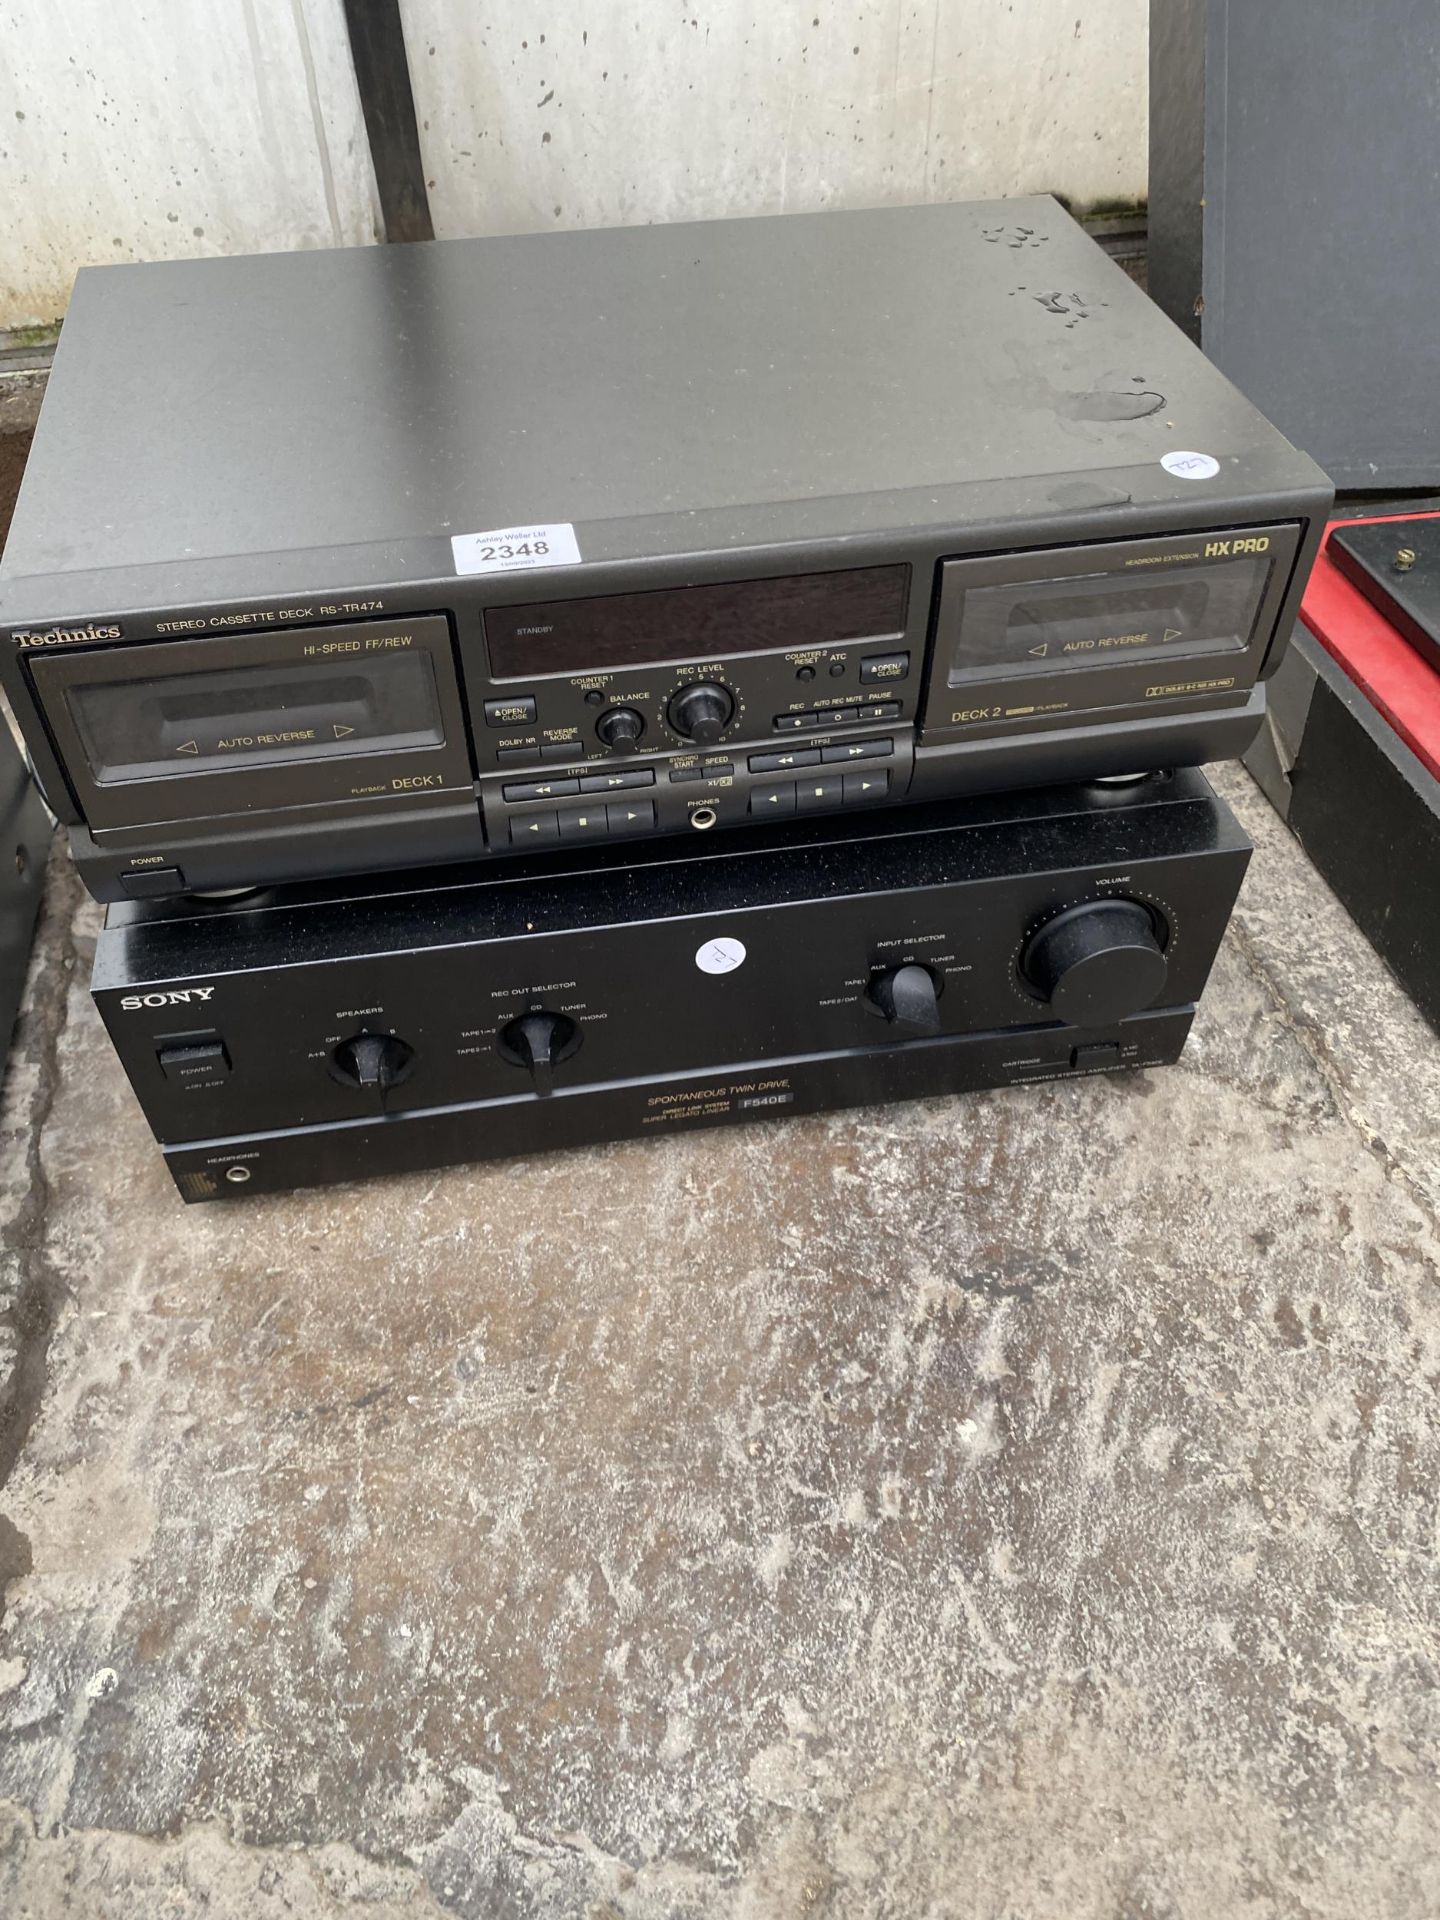 A TECHNICS STEREO CASETTE DECK AND A SONY AMPLIFIER